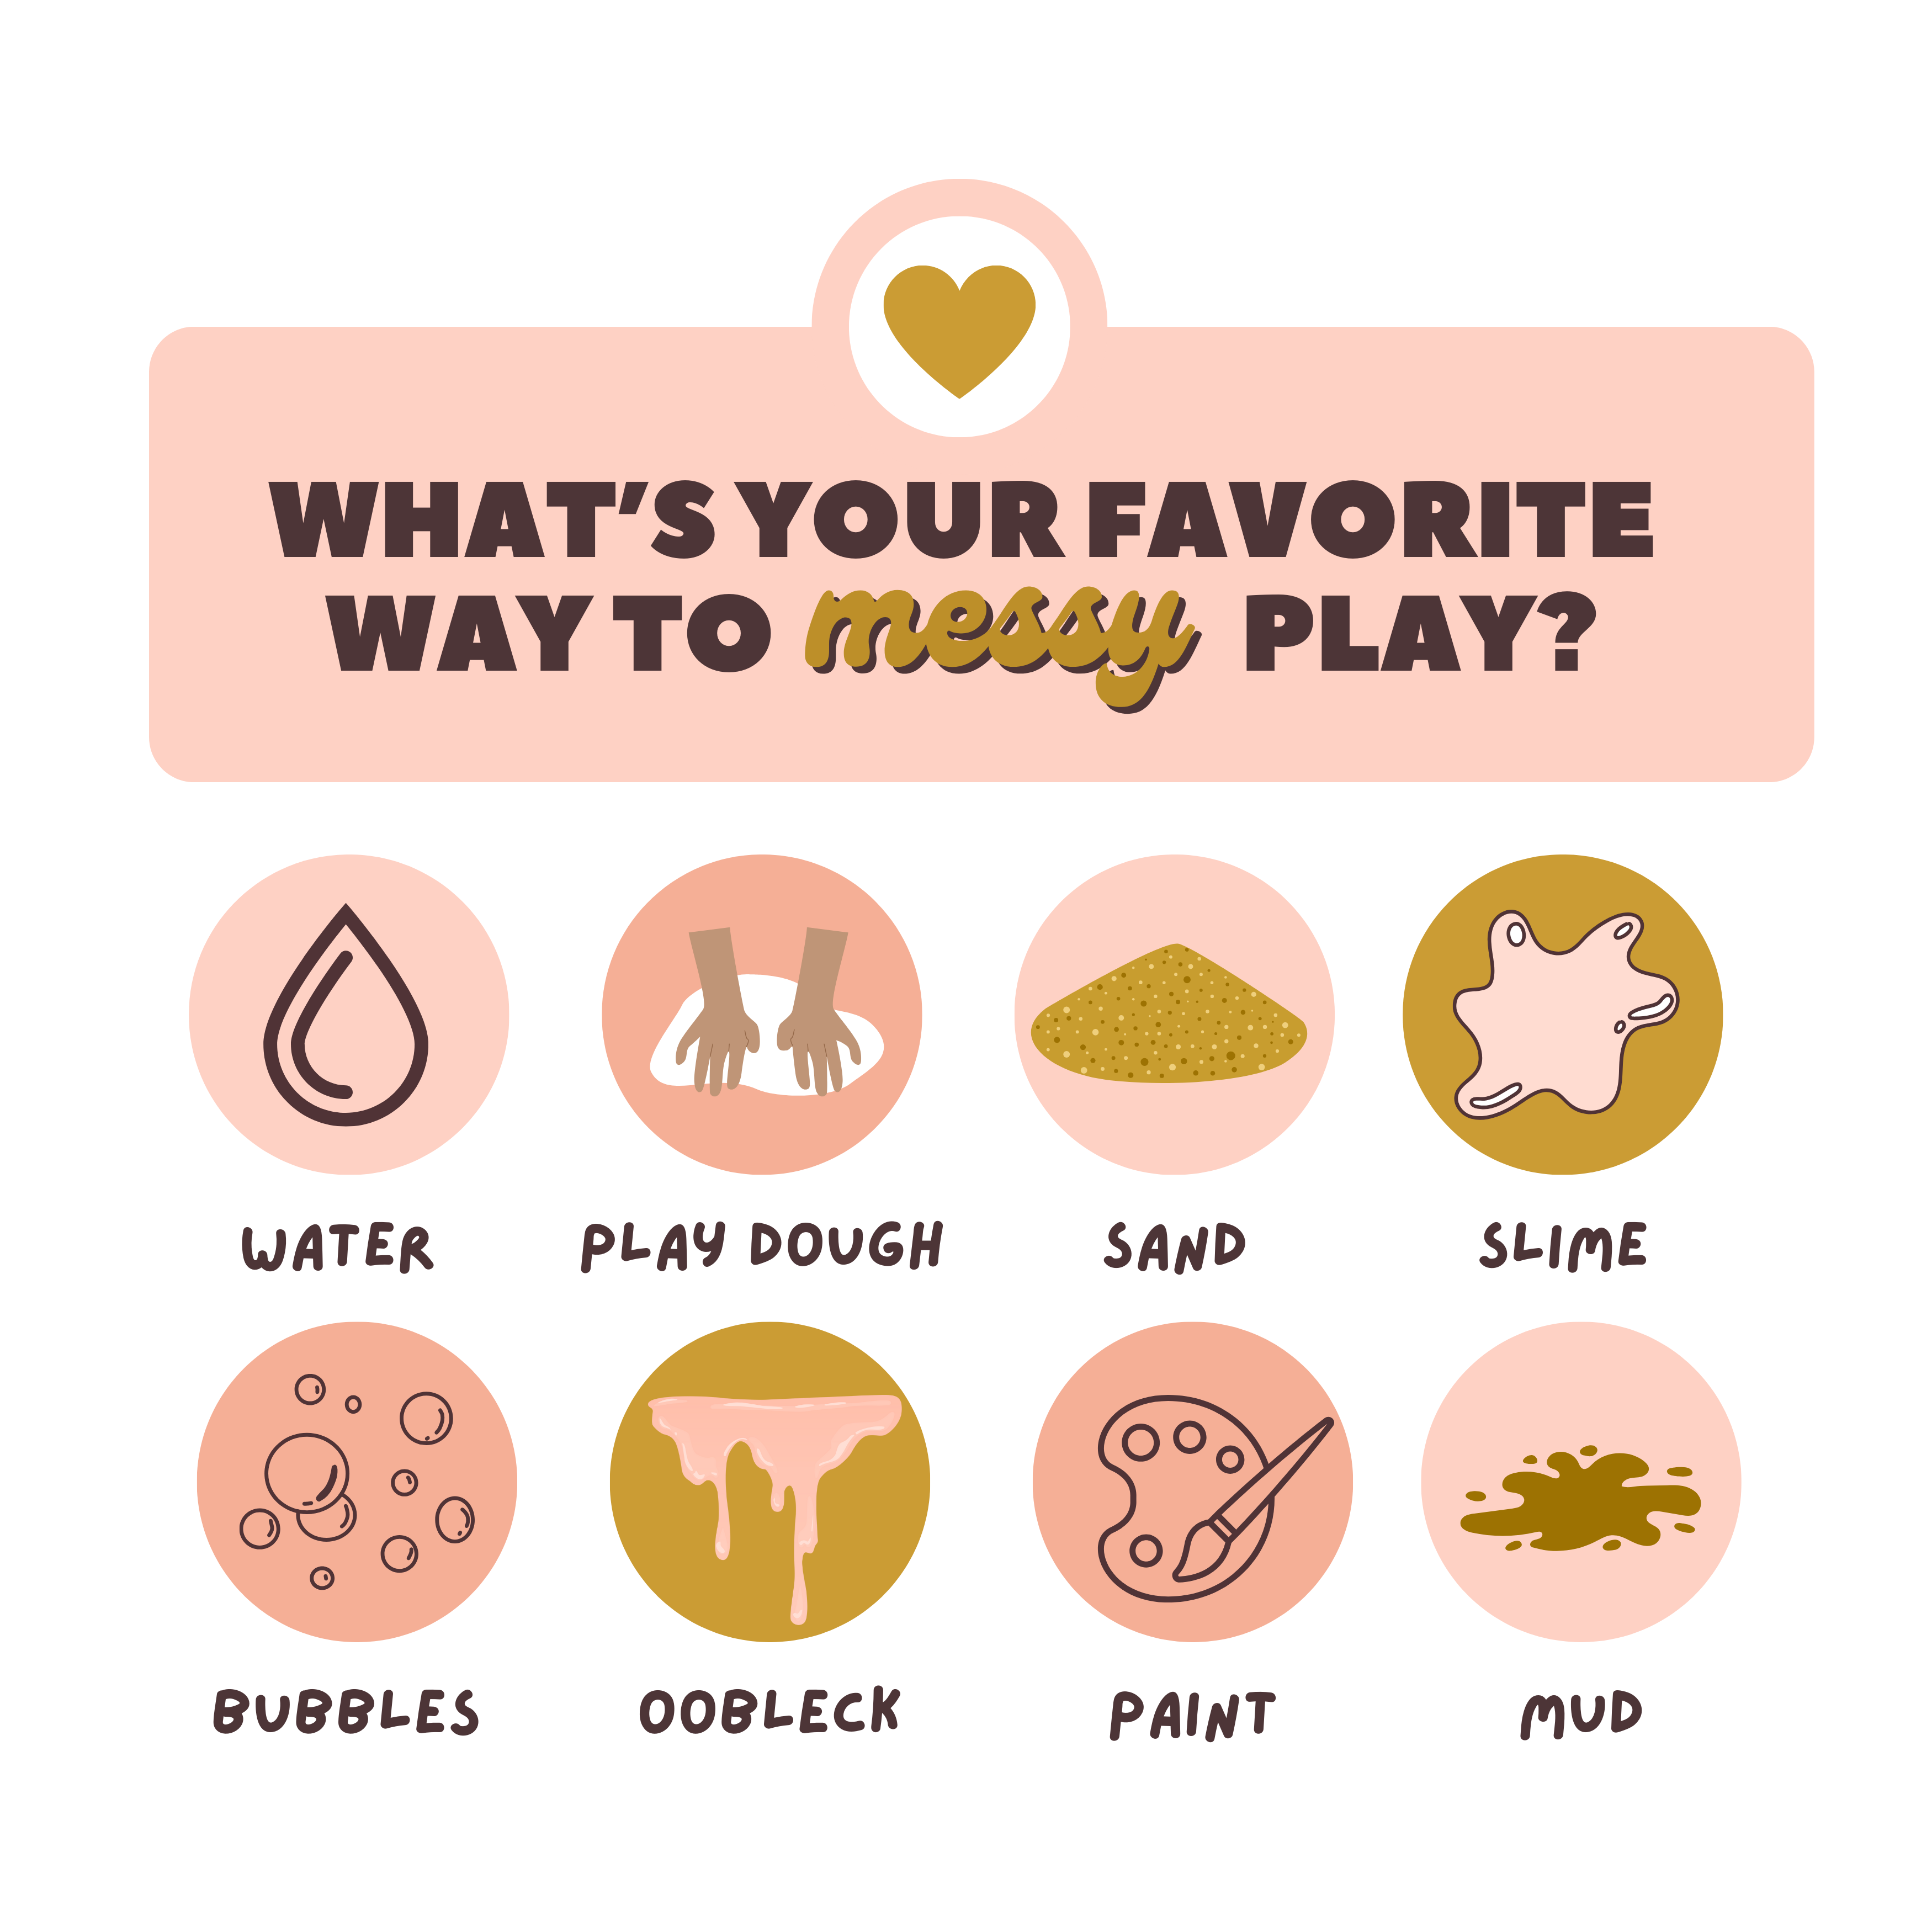 🖐️What’s your favorite way to messy play? 💦